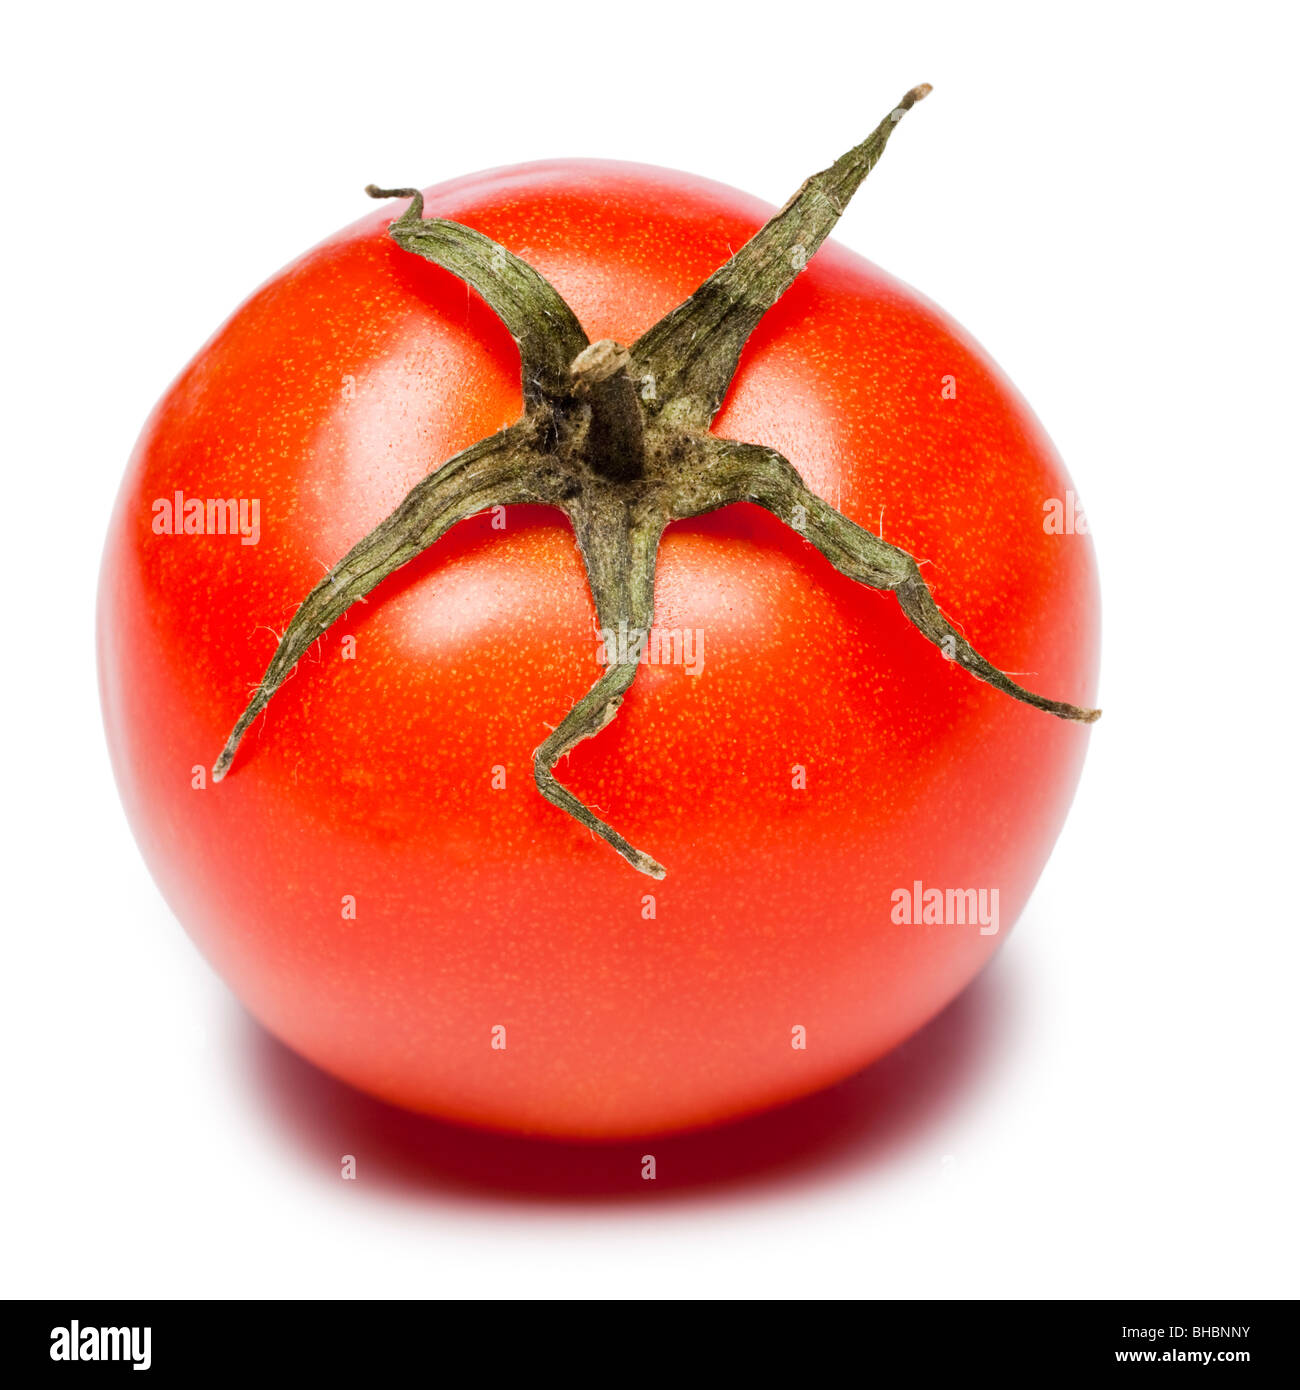 Tomato with part of vine attached Stock Photo